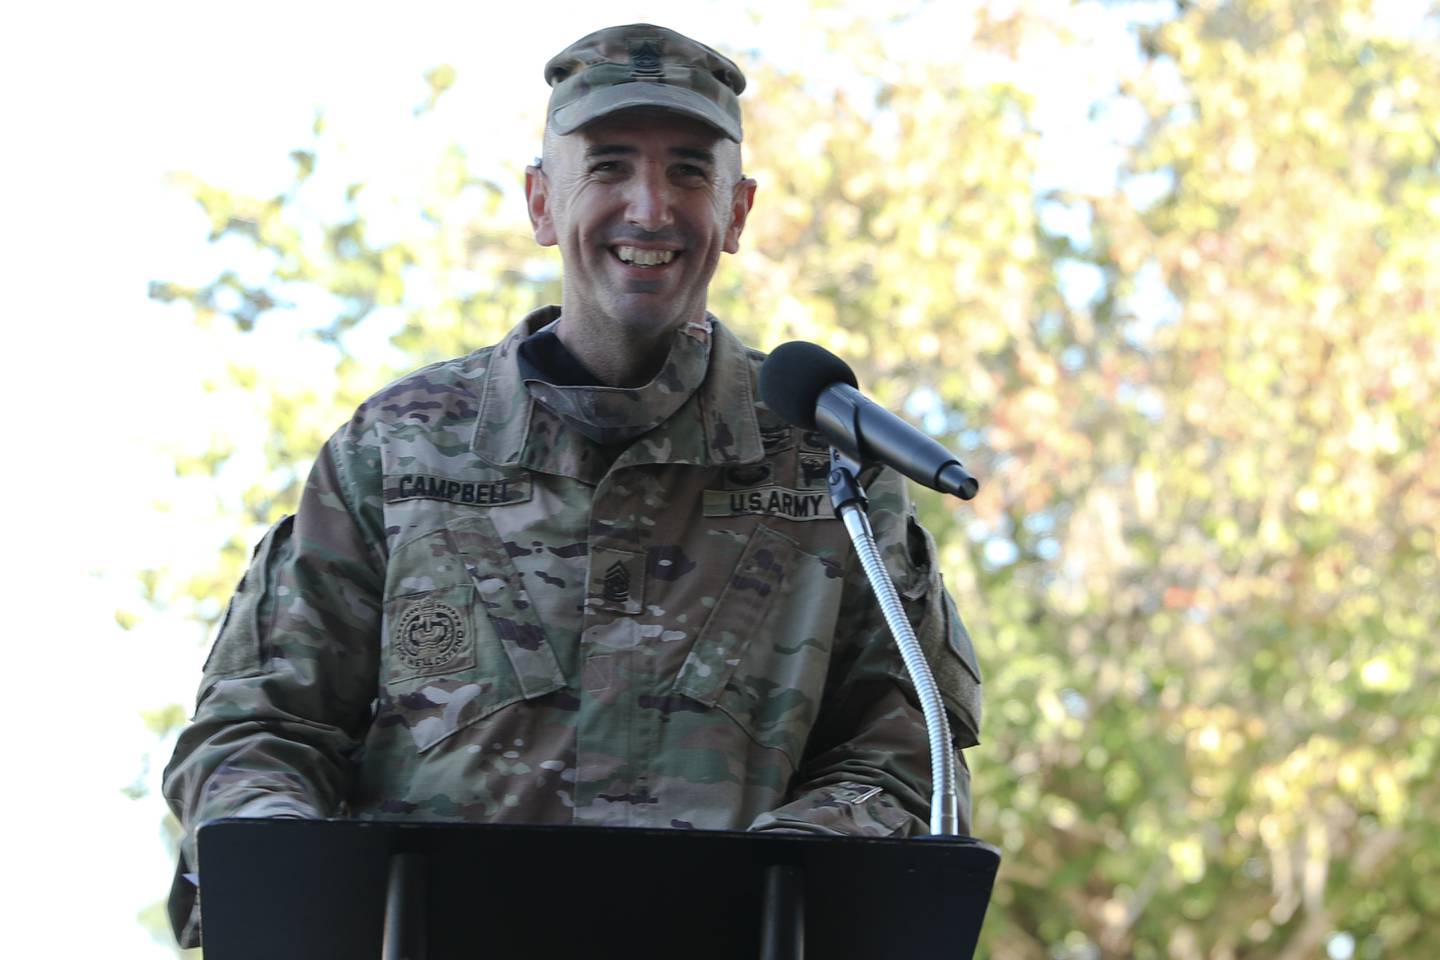 Command Sgt. Maj. Thomas E. Campbell smiles during his farewell speech at a change-of-responsibility ceremony Sept. 30, 2020, at Fort Stewart, Georgia.